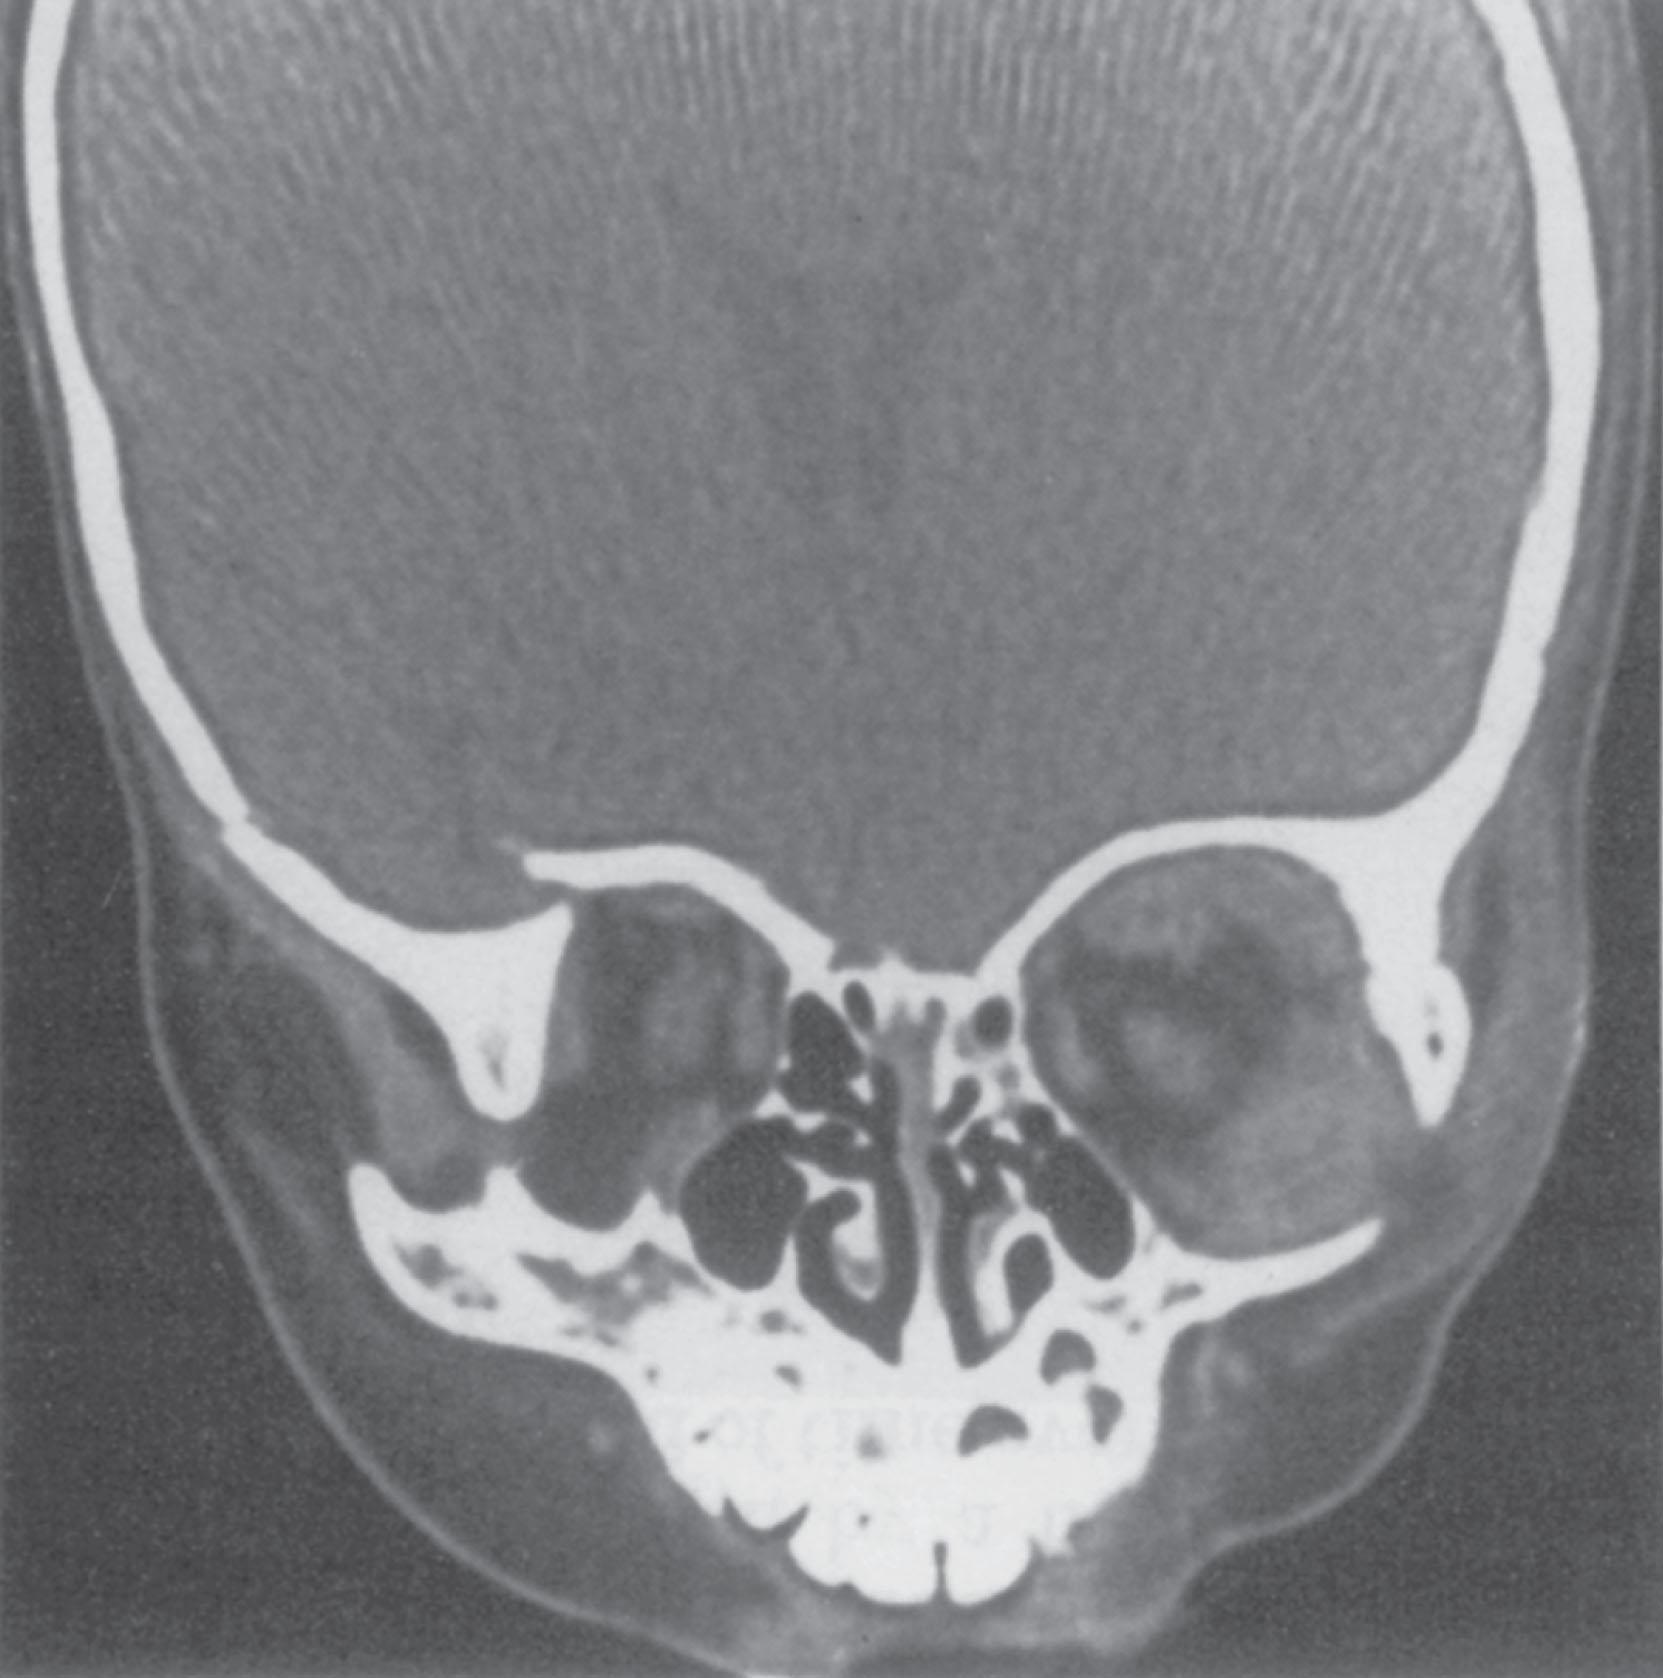 Figure 22.14, Coronal computed tomography scan demonstrating a right frontal–temporal–orbital fracture. The lateral orbital wall is compressed medially, decreasing orbital volume and resulting in exophthalmos.